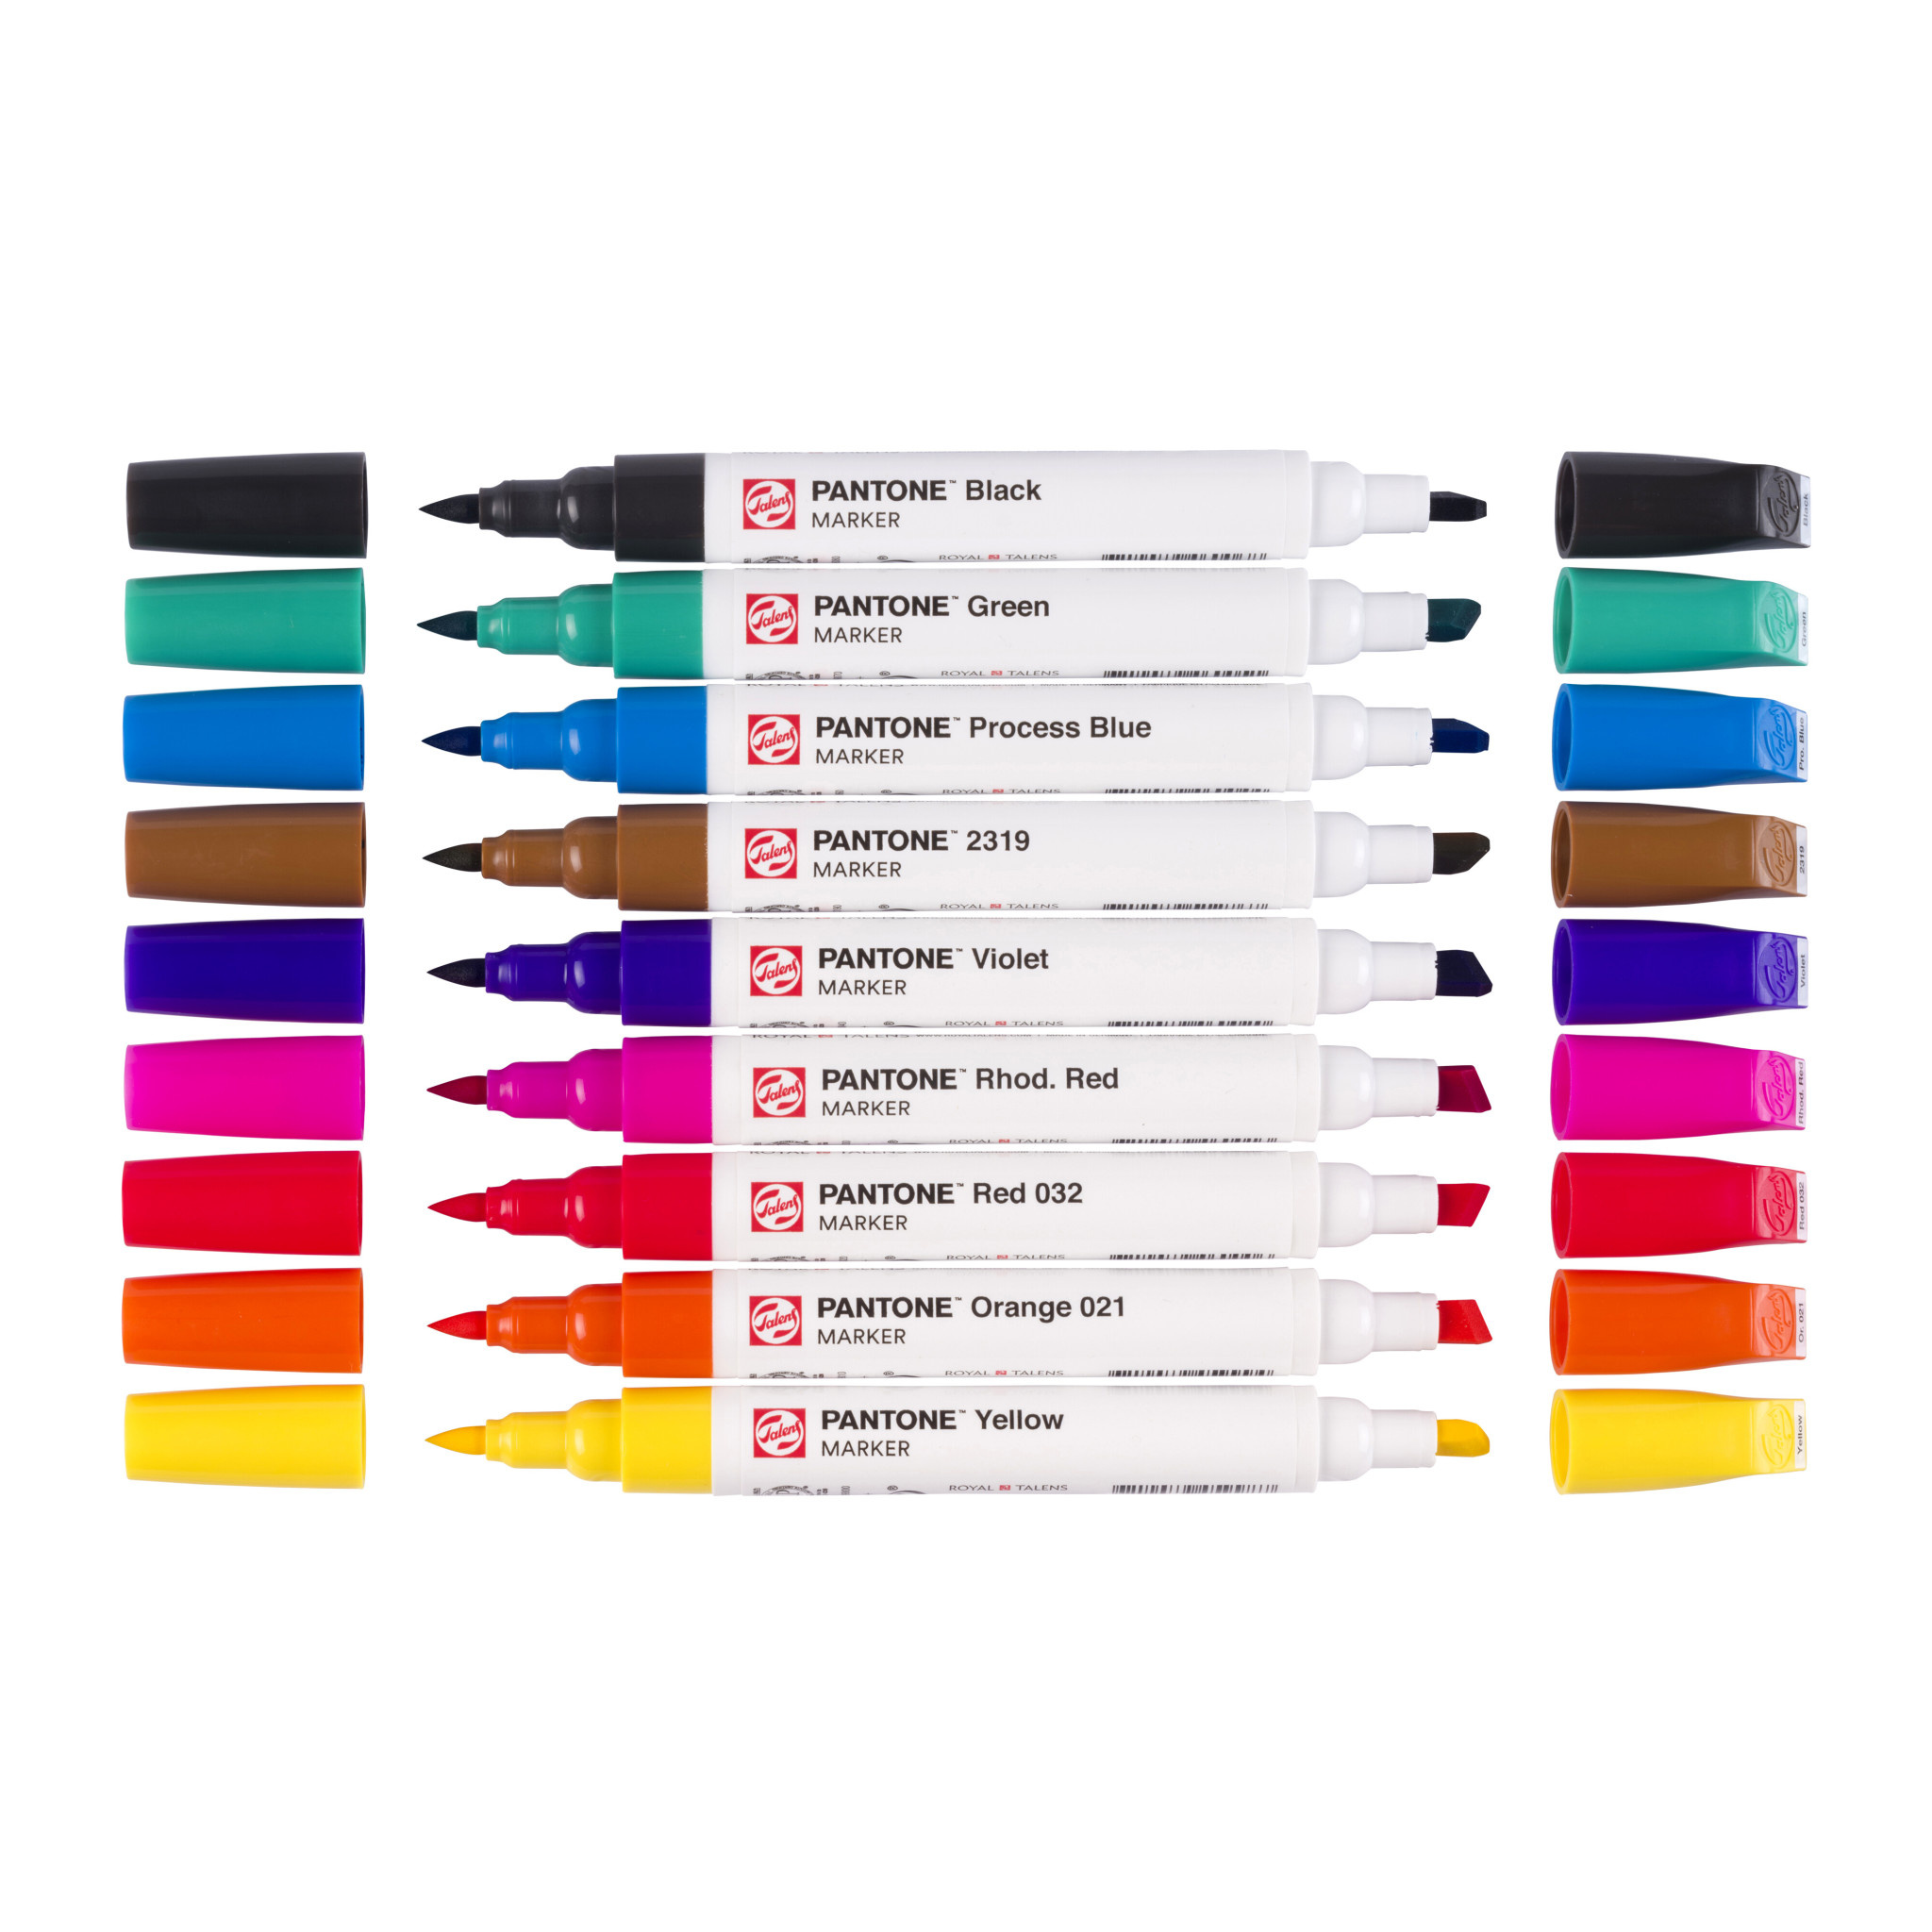 Talens Pantone Marker Cool Gray Set of 9 - The Art Store